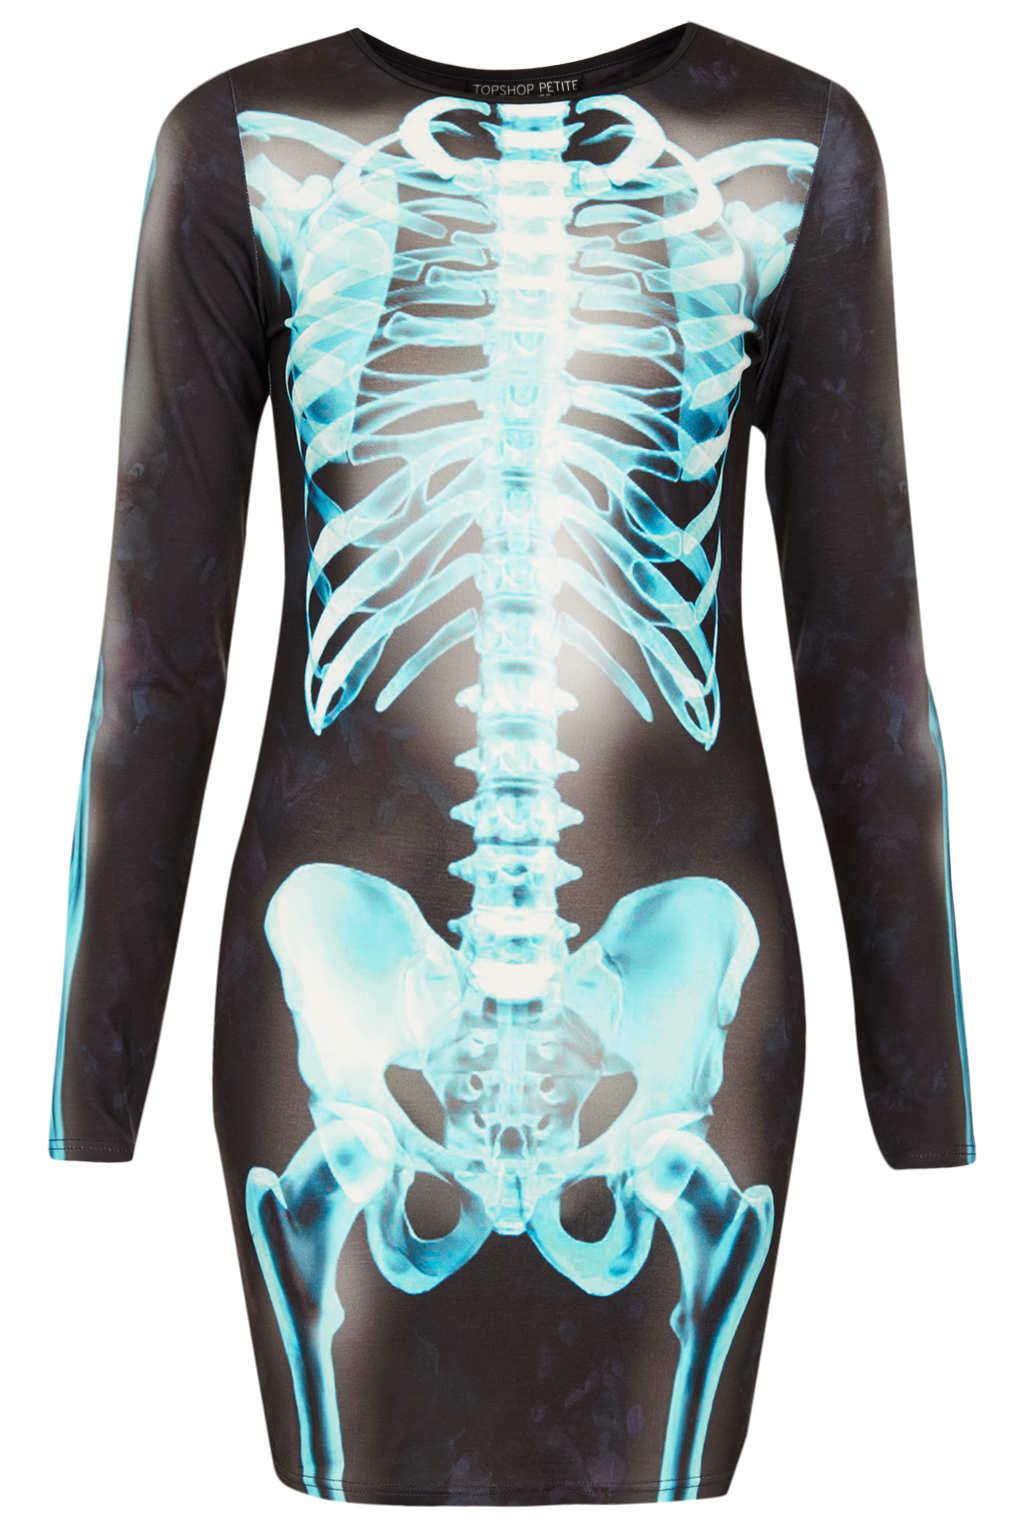 Bodycon dresses for women x ray